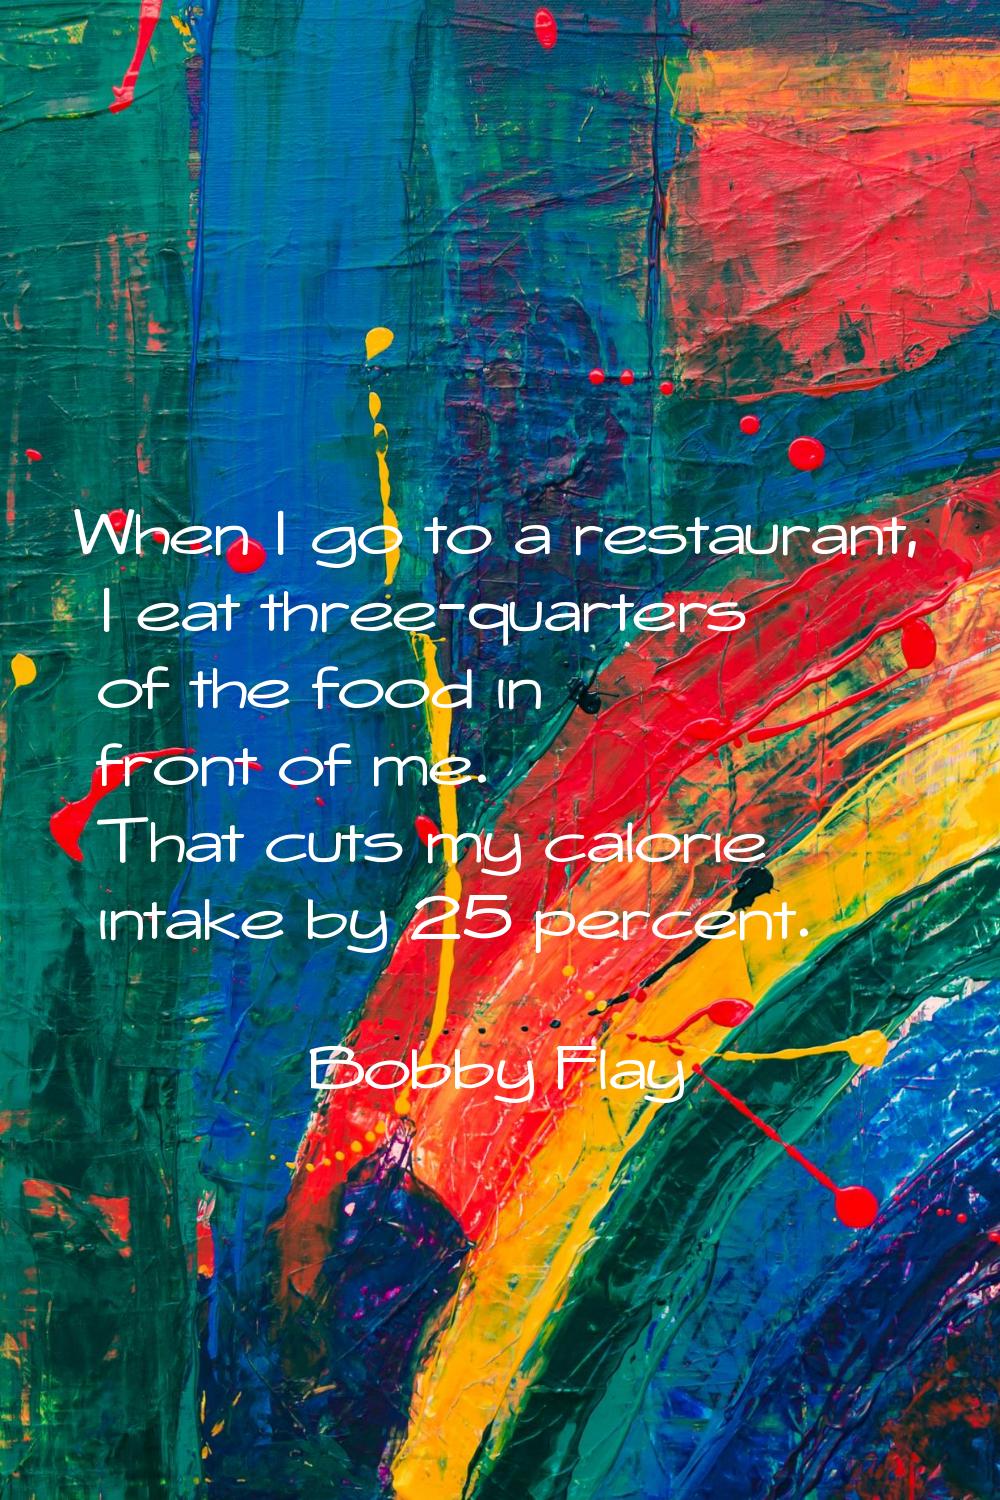 When I go to a restaurant, I eat three-quarters of the food in front of me. That cuts my calorie in